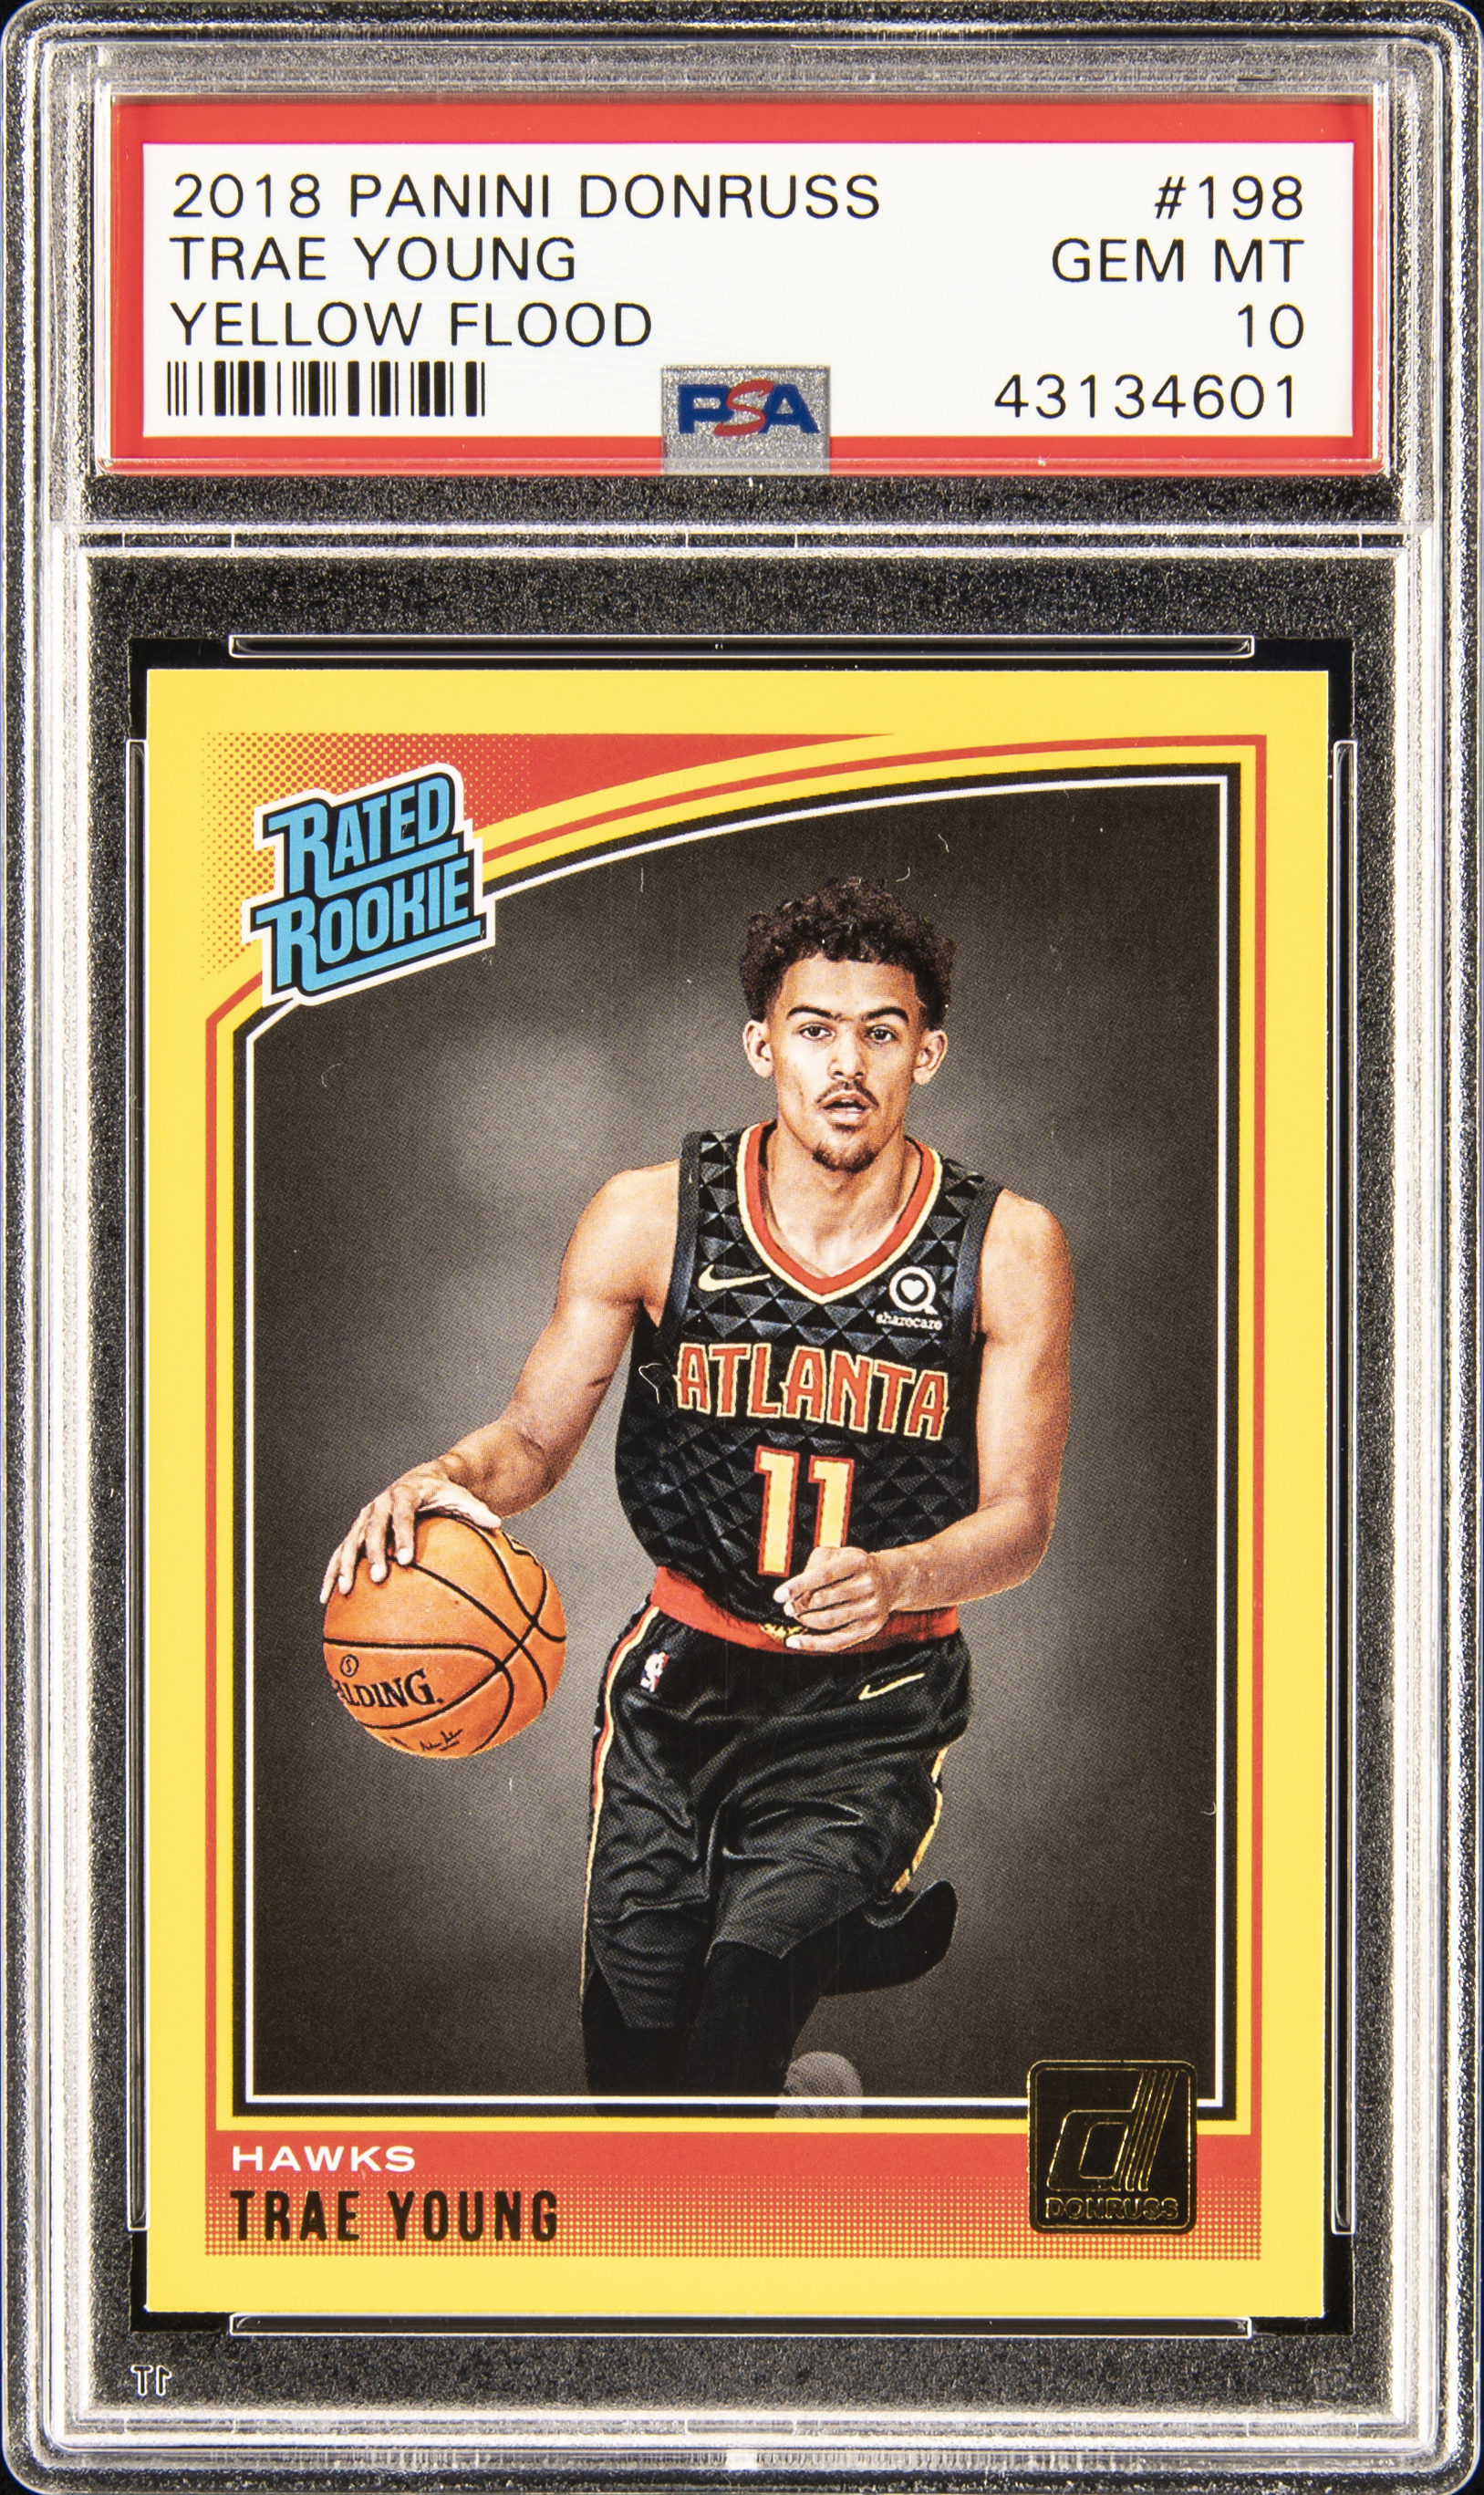 2018-19 Panini Donruss Yellow Flood Rated Rookie #198 Trae Young Rookie Card – PSA GEM MT 10